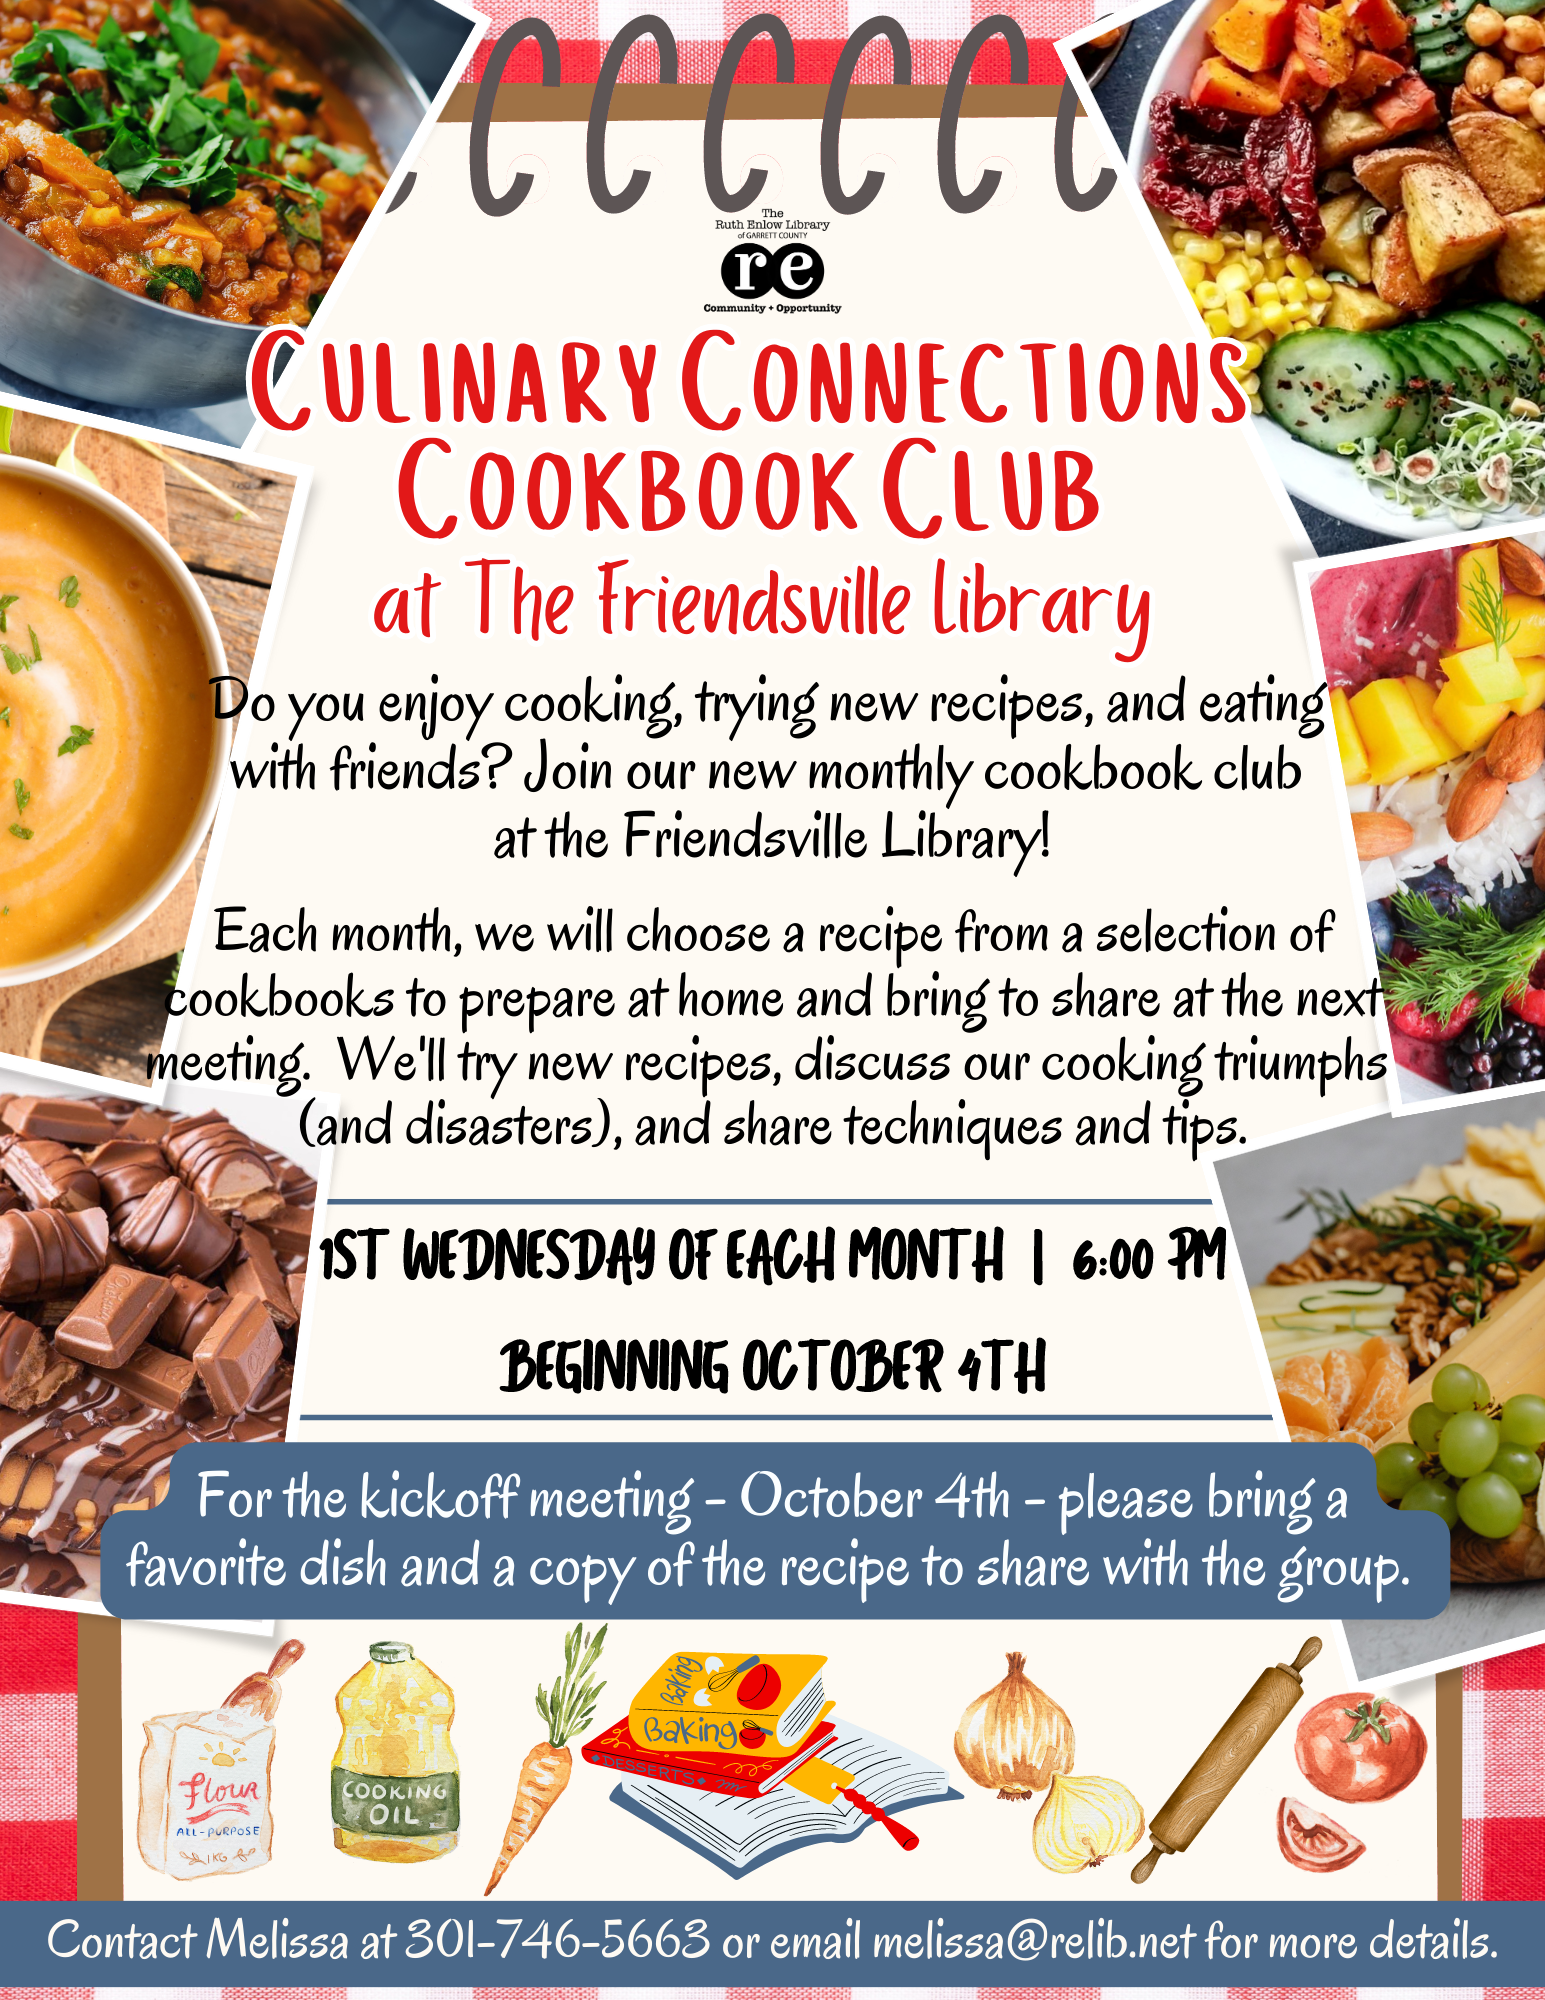 Flyer with food images and details about Cookbook Club at the Friendsville Library